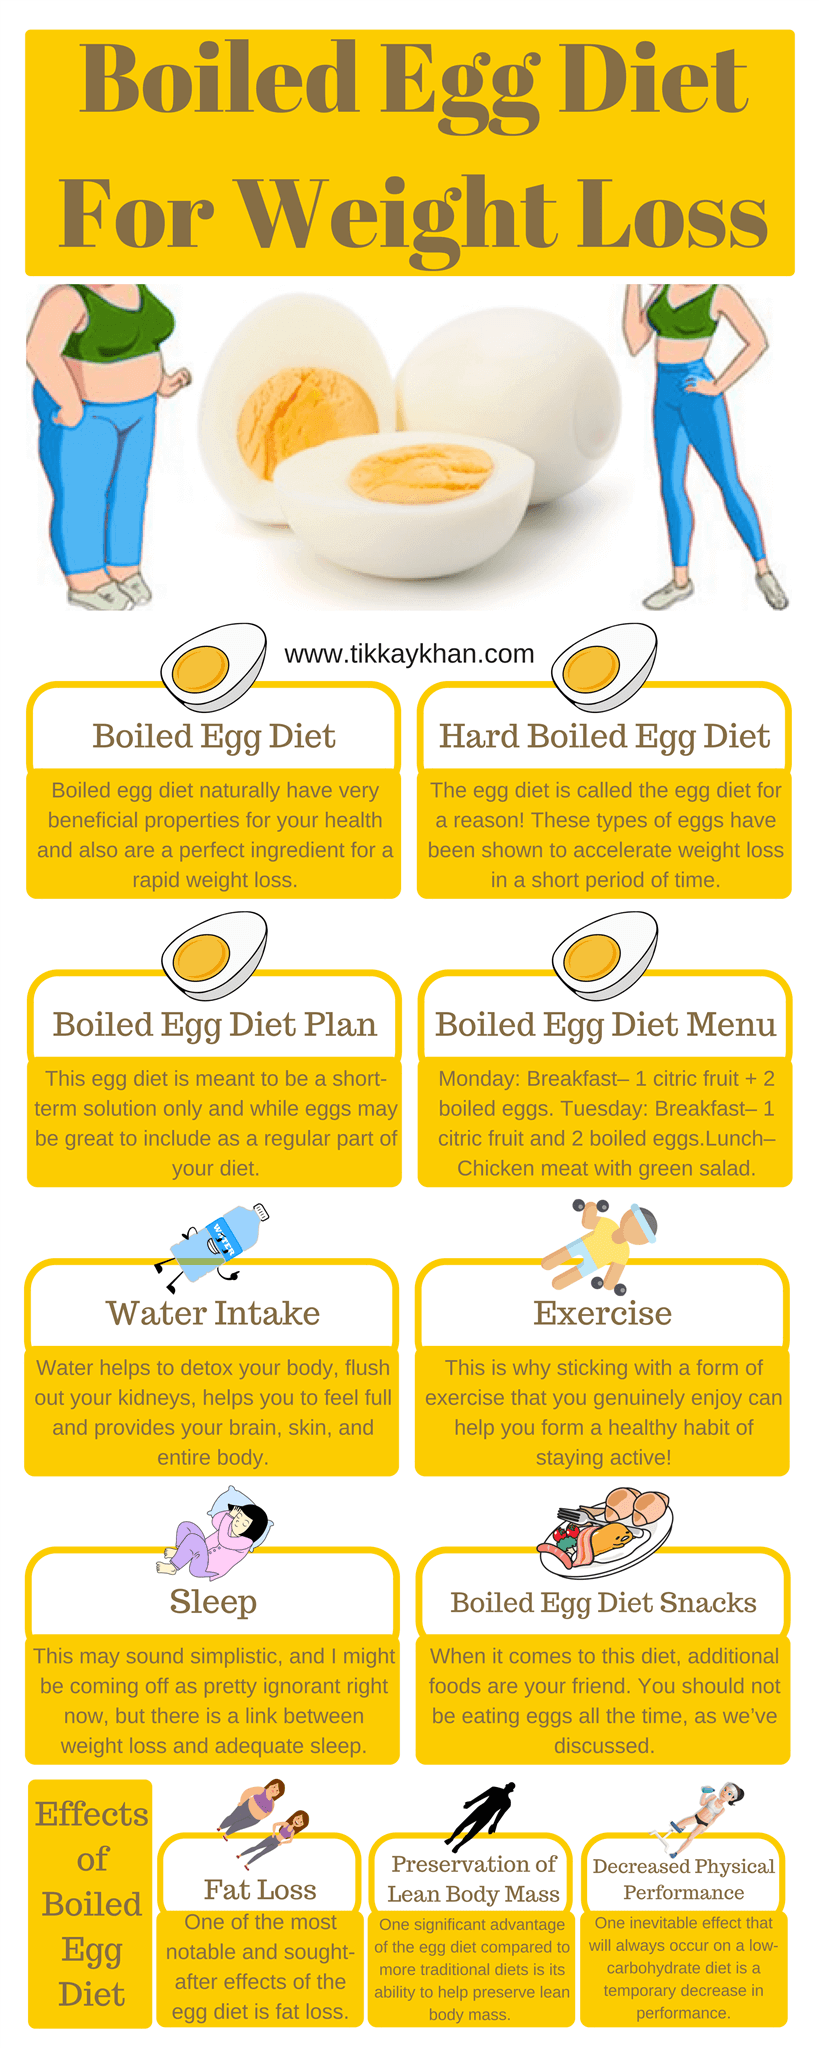 Boiled Egg Diet For Weight Loss